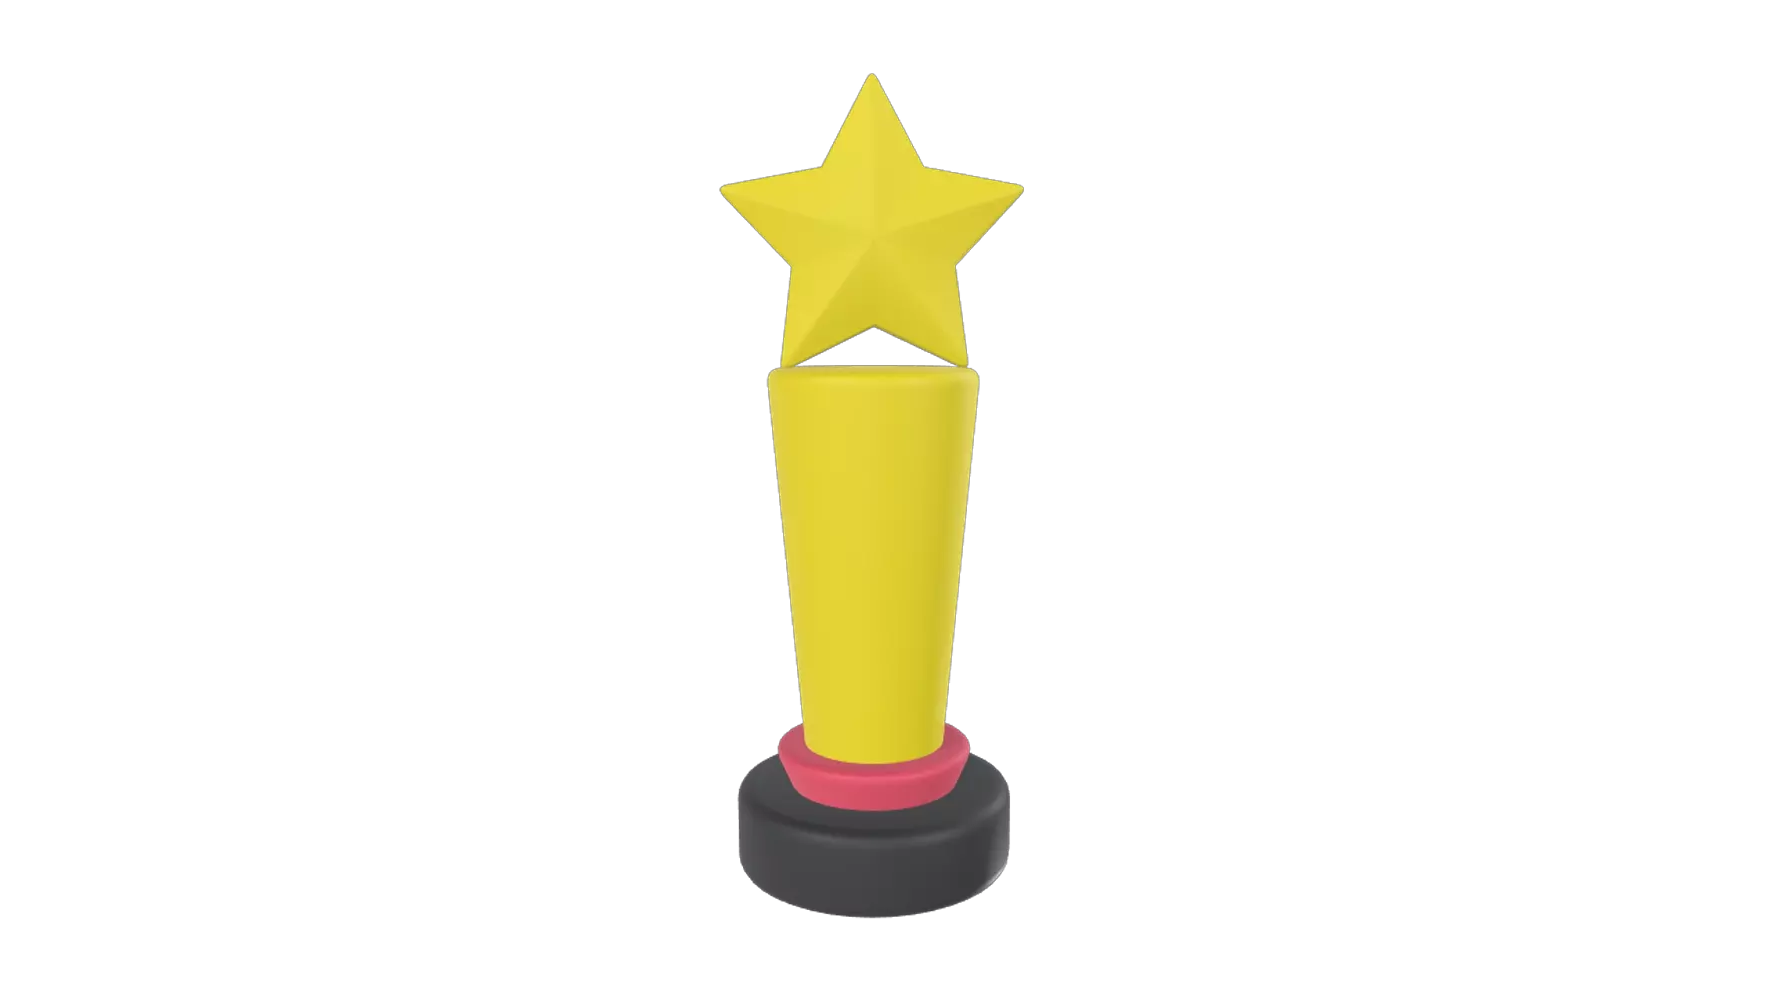 Star Trophy 3D Graphic